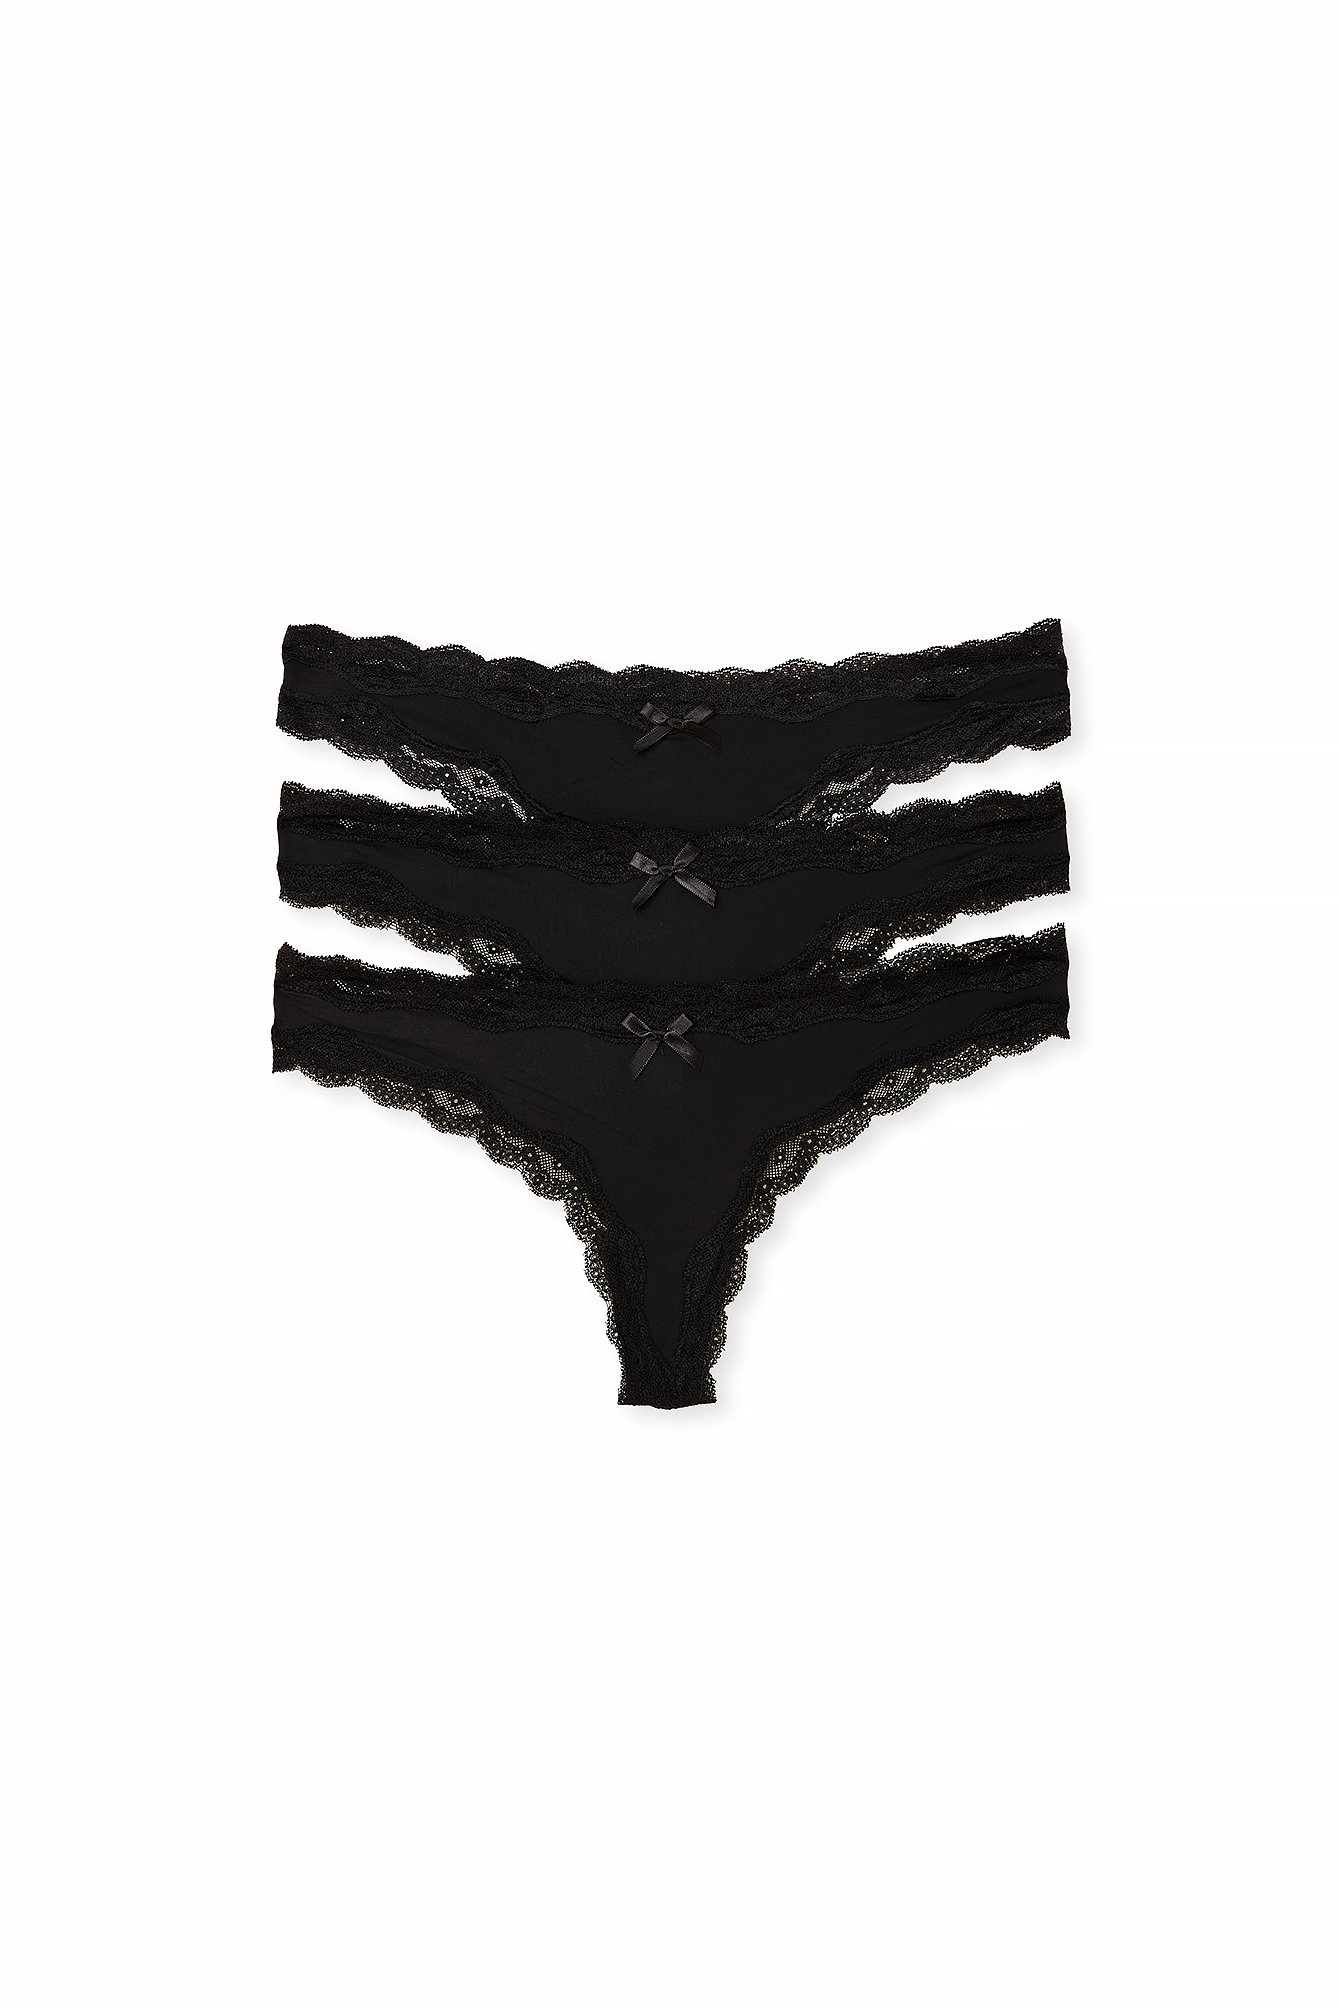 Black Micro Lace Edge String 3-pack